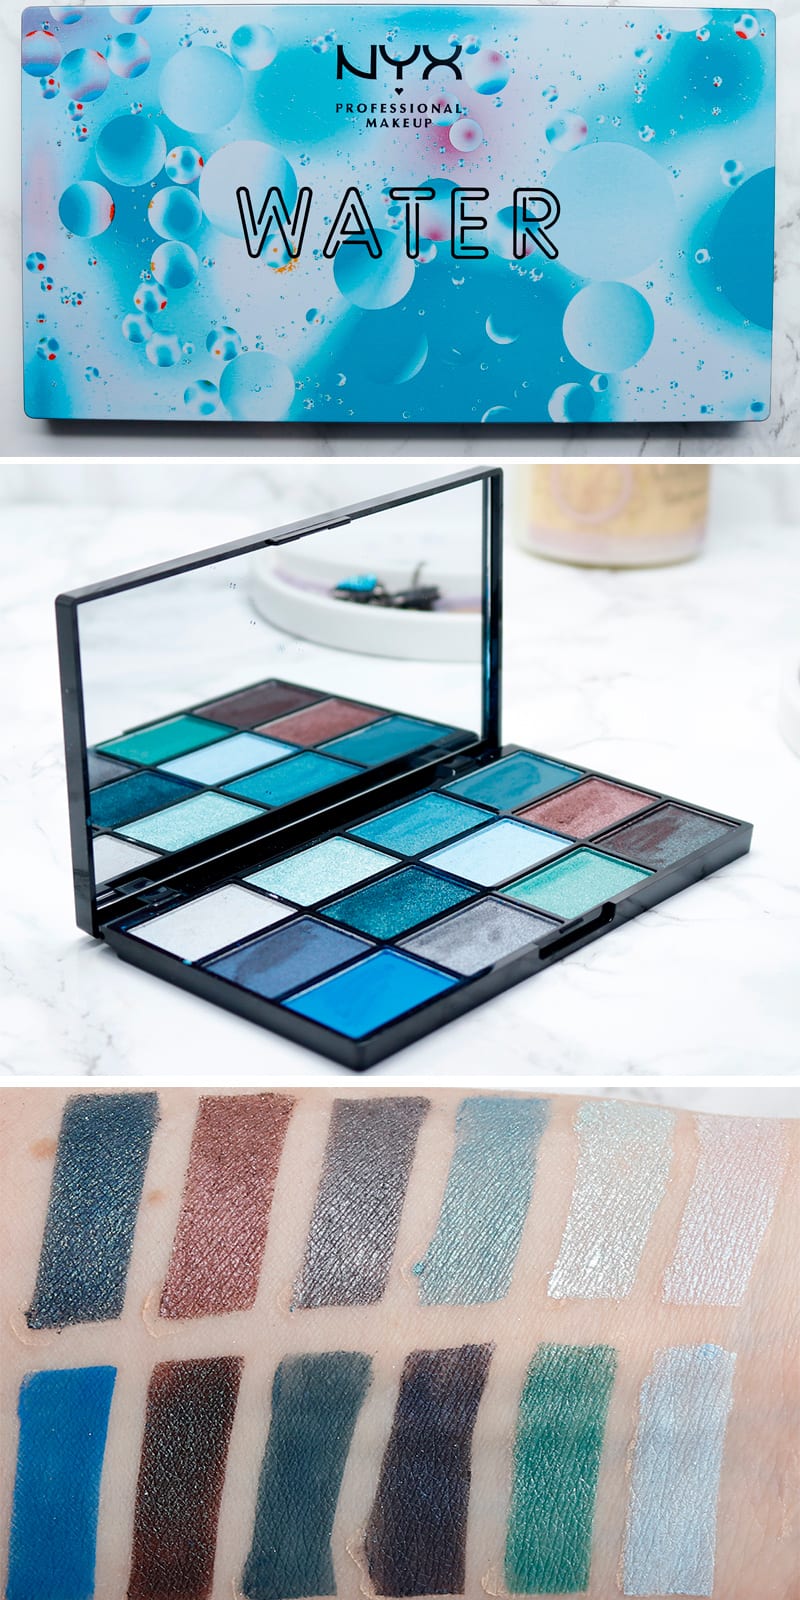 Nyx In Your Element Water Palette Swatches on Pale Skin & Review. I have the Water, Wind and Air In Your Elements palettes. This one is my favorite!